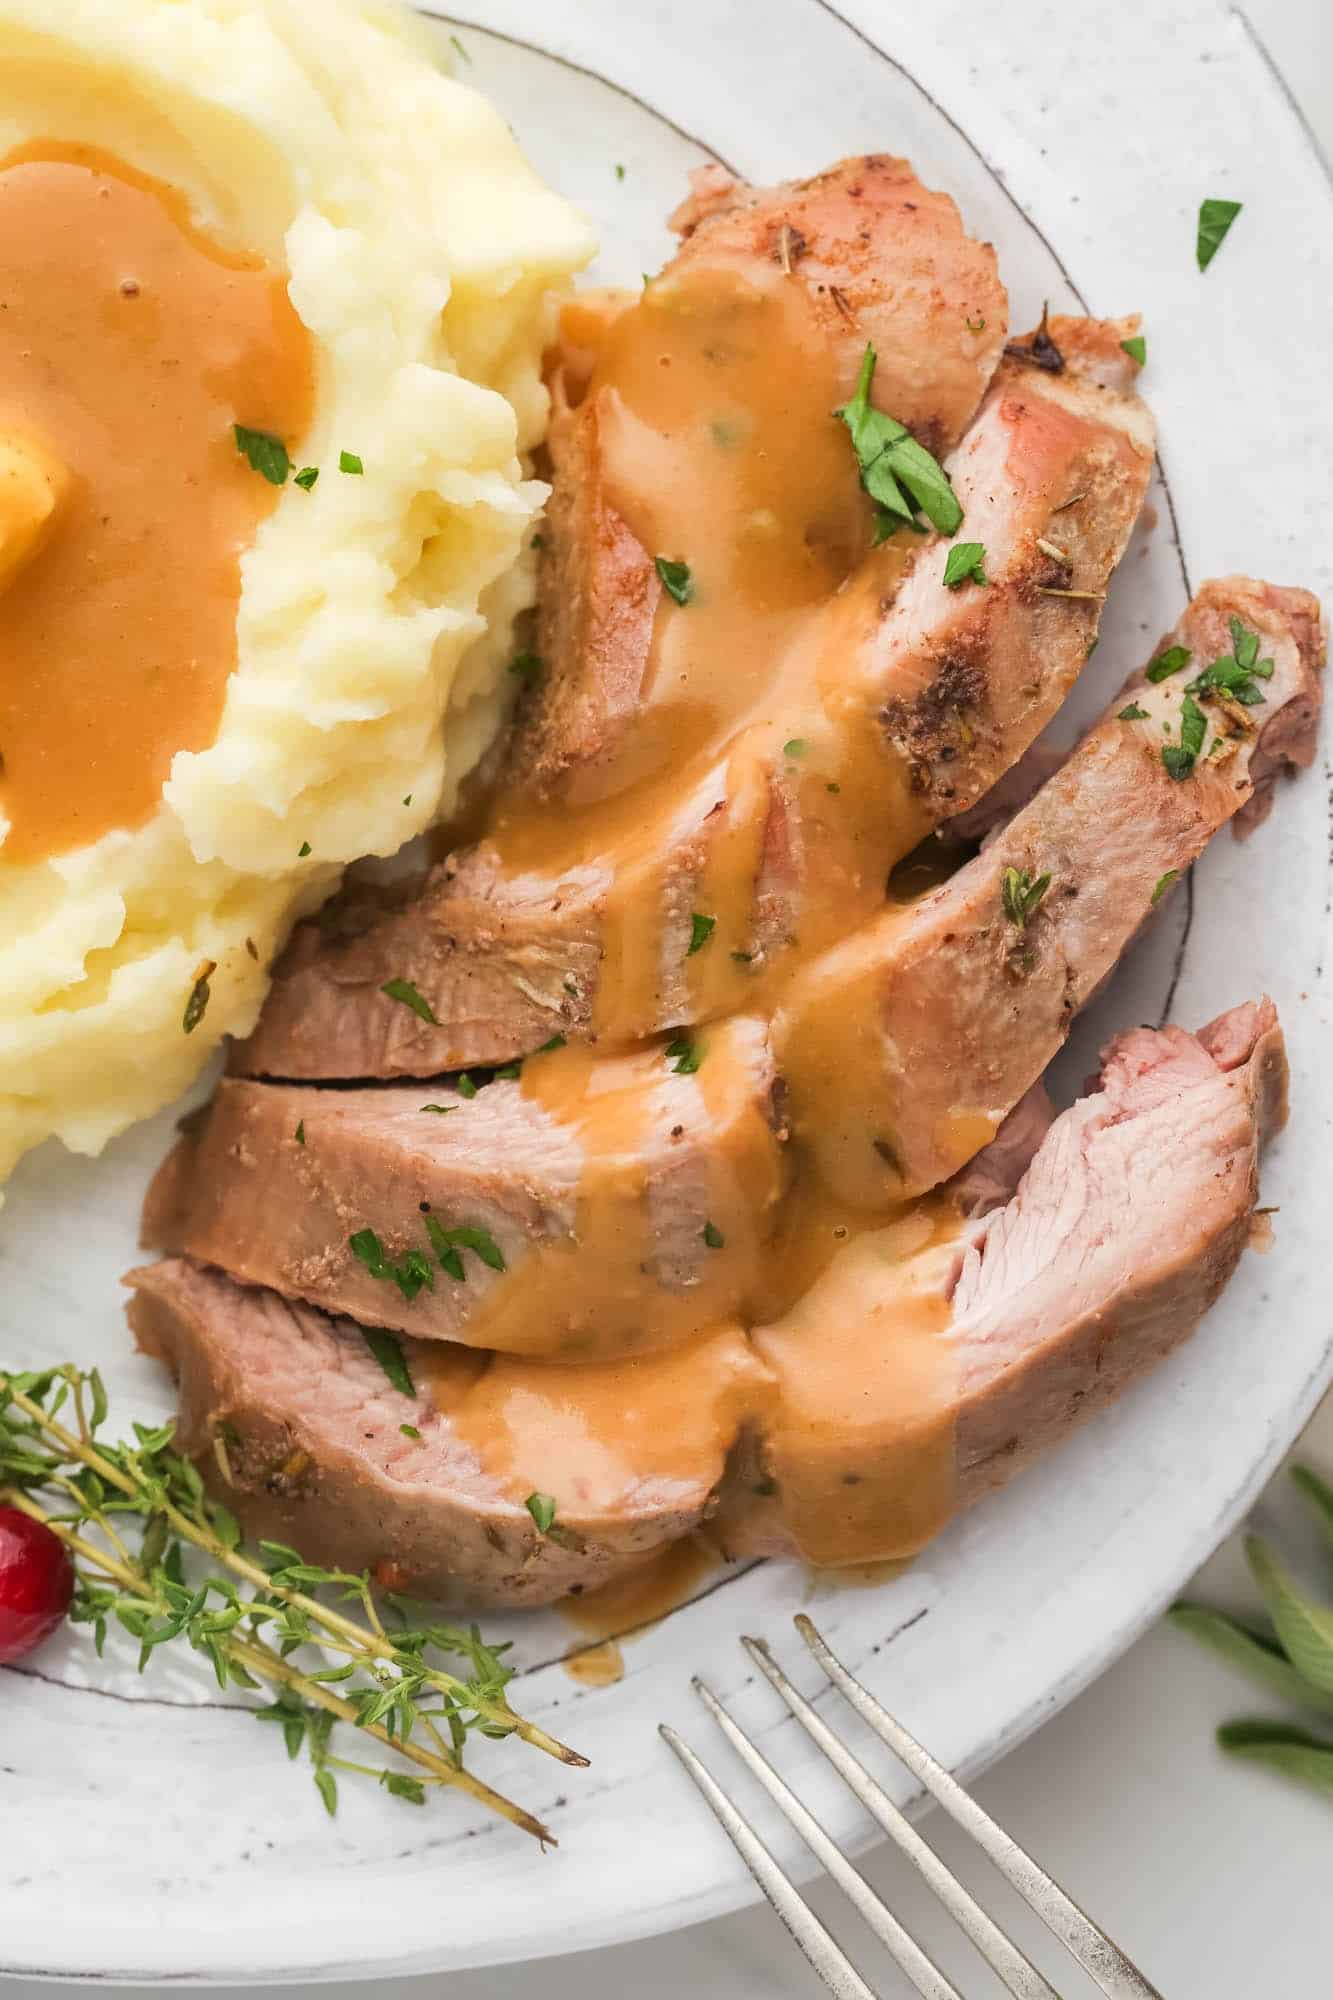 Sliced dark meat turkey on a plate, topped with gravy, next to a serving of mashed potatoes with gravy.